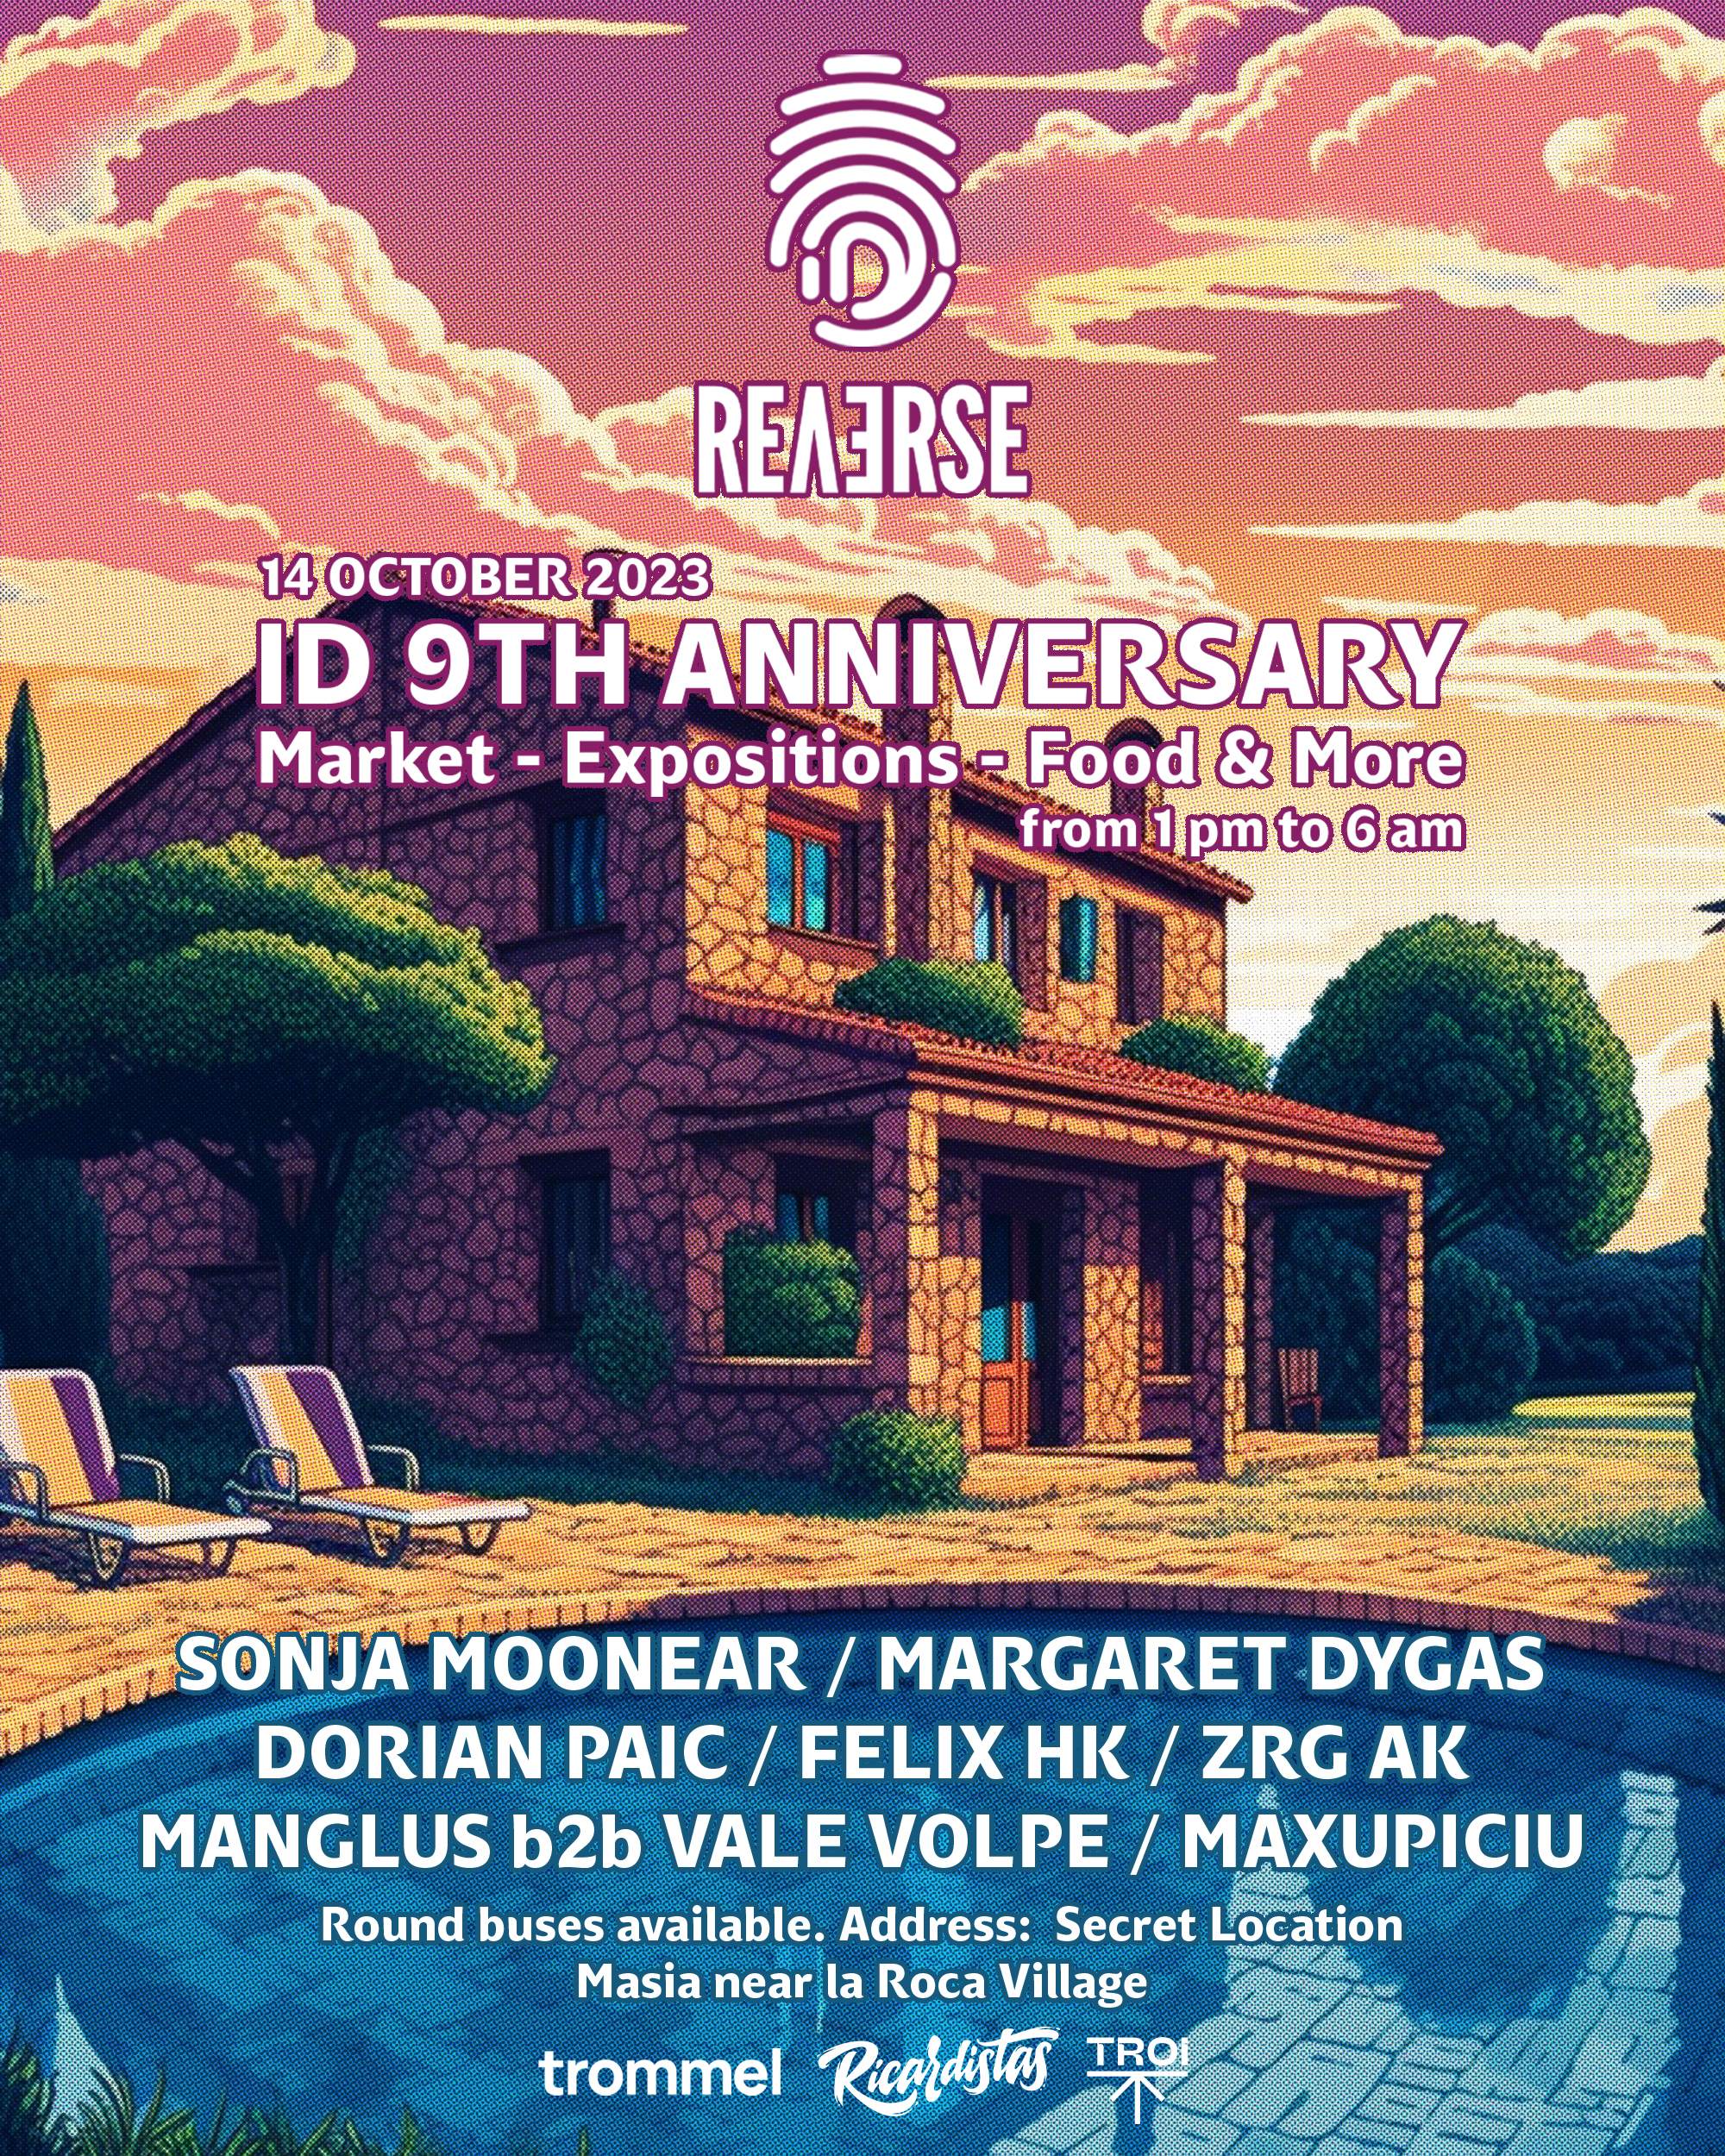 ID 9th Anniversary with Sonja Moonear, Margaret Dygas, Dorian Paic, zrg AK + more by ID & Reverse - フライヤー表